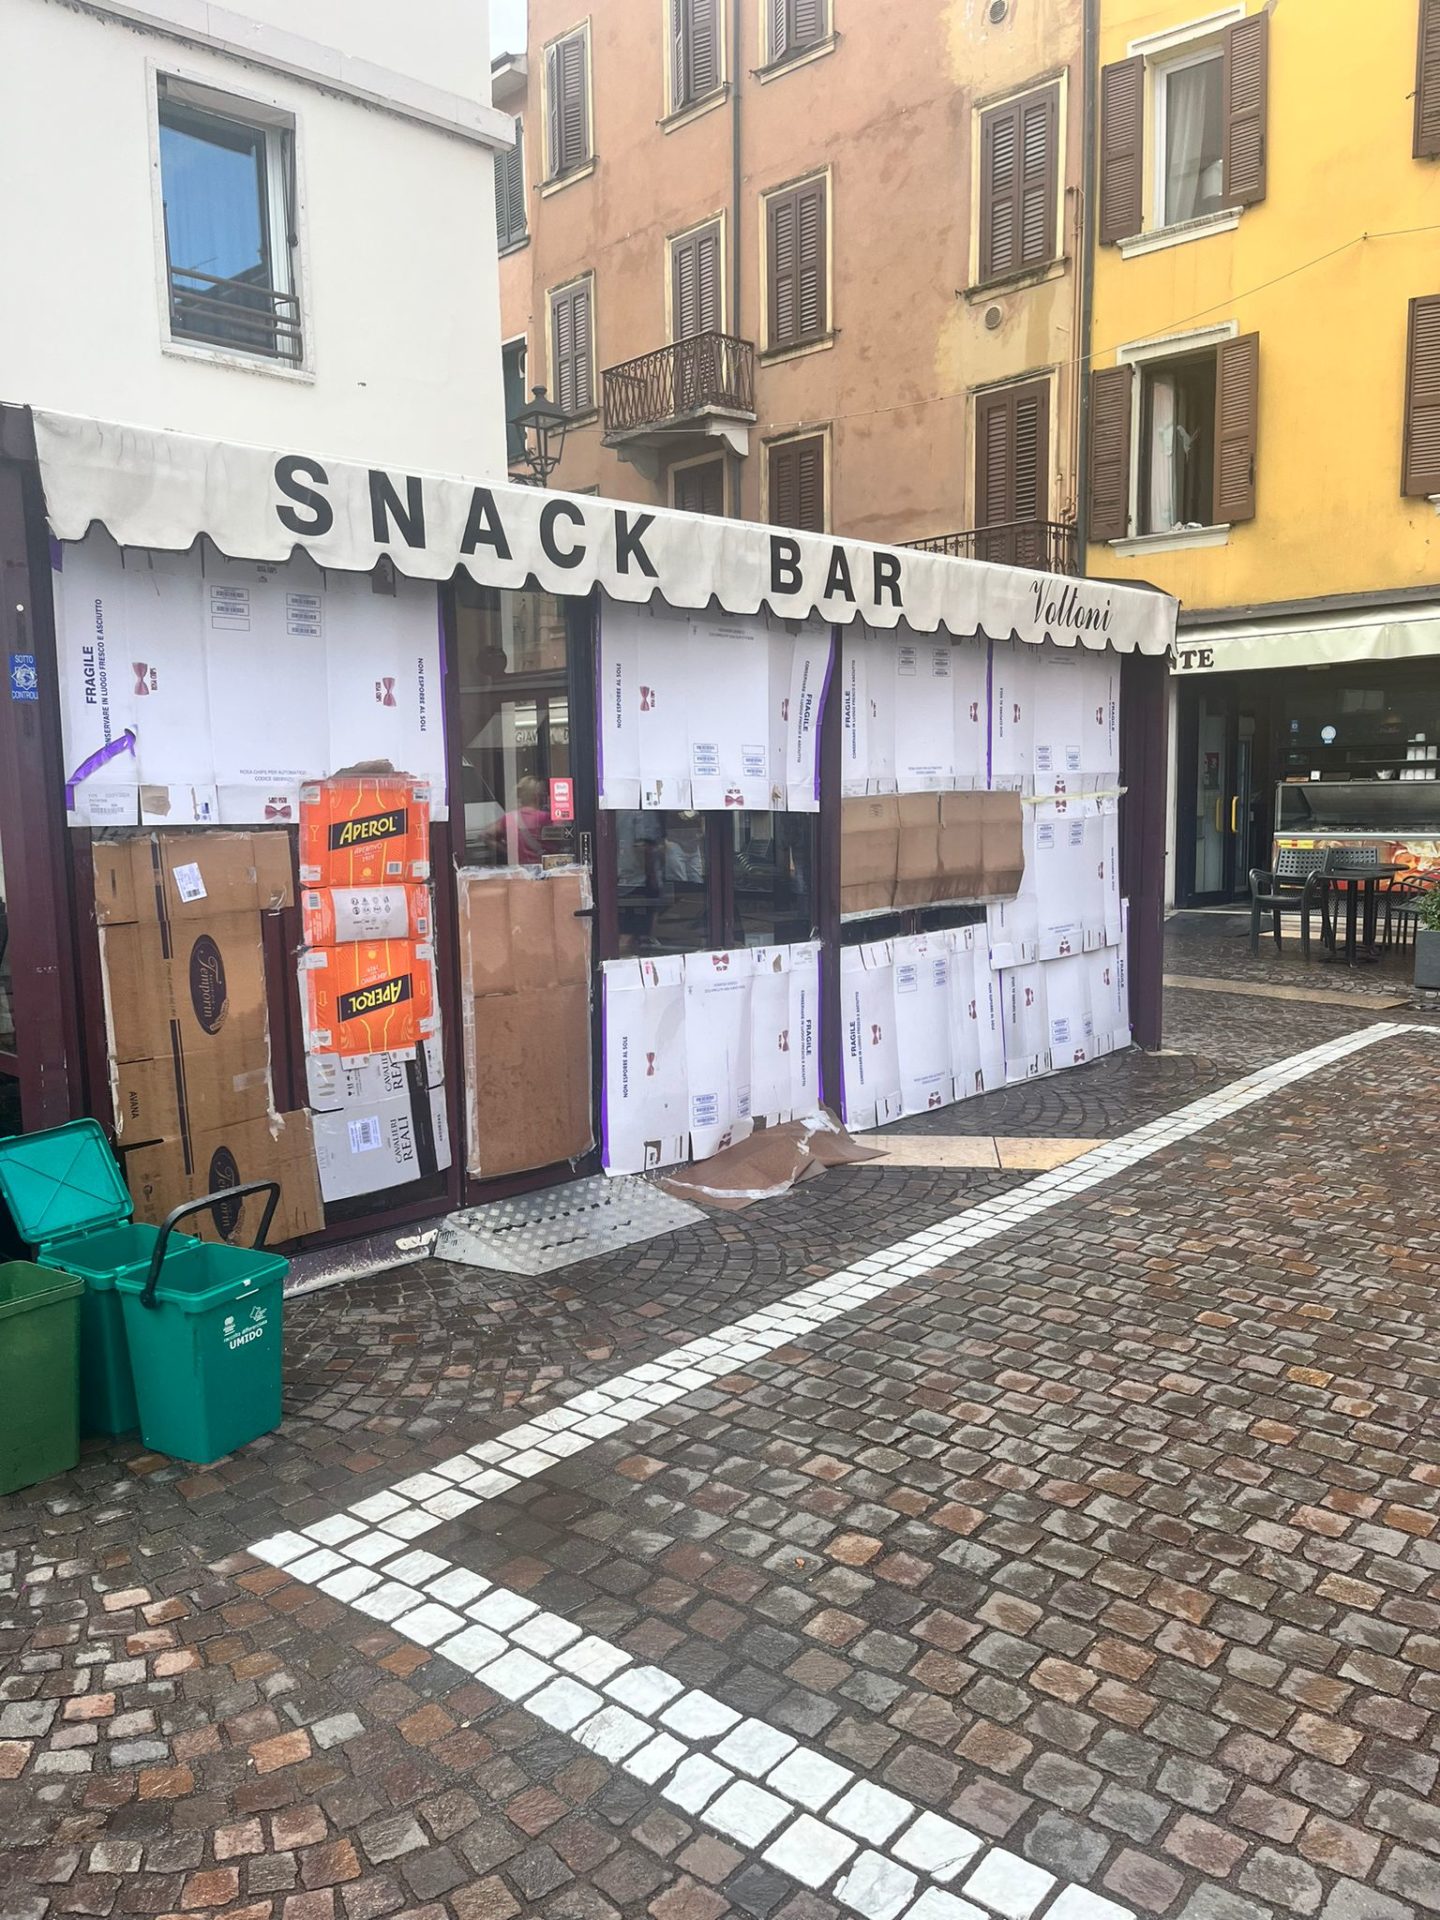 Boarded up bar in Peschiera, Lake Garda after hailstorm (Photo by Gráinne Smyth)